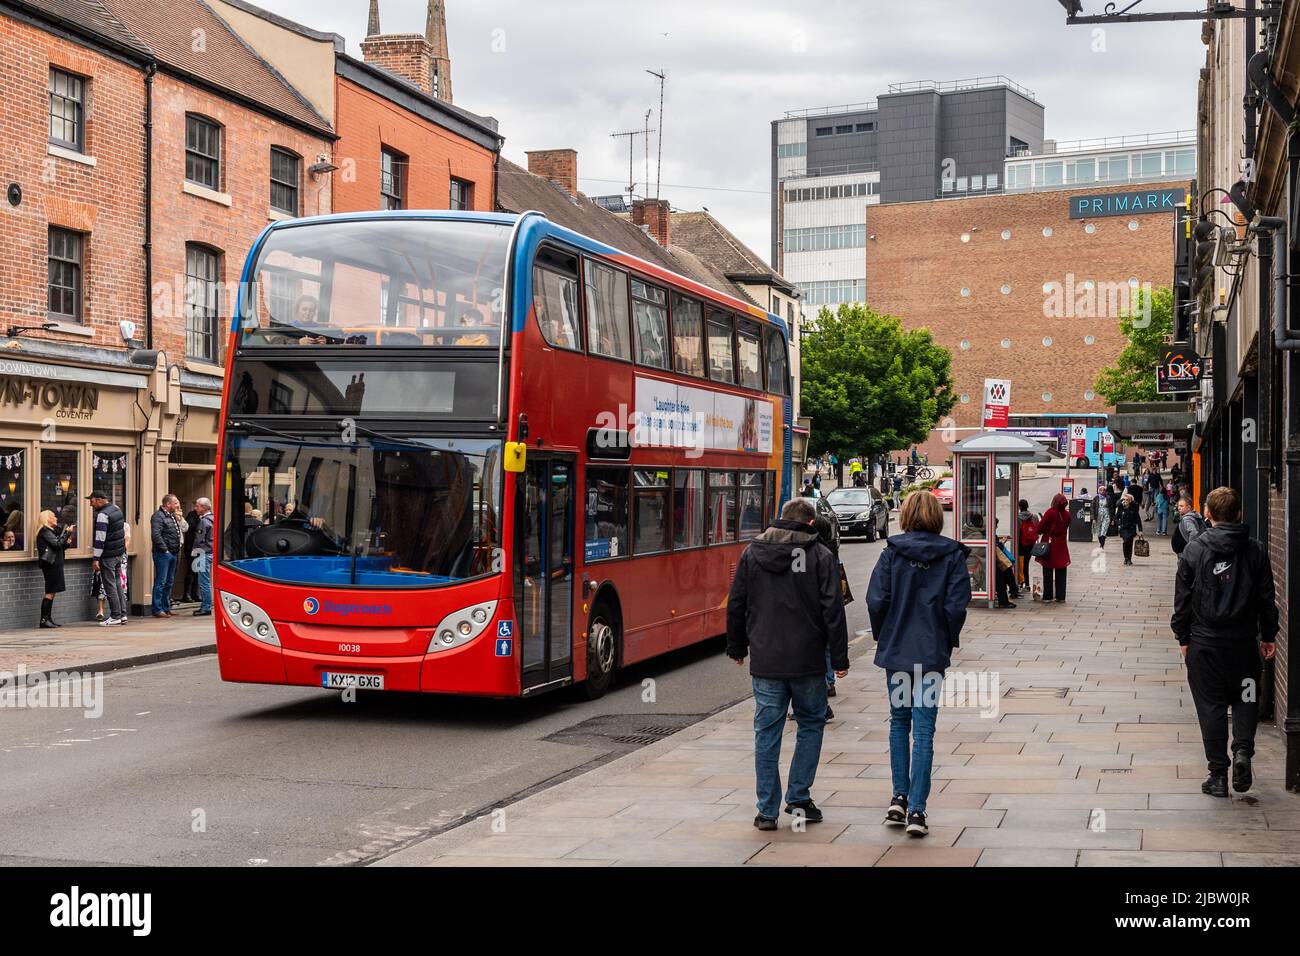 Stagecoach Bus in The Burgess, Coventry, West Midlands, UK. Stock Photo